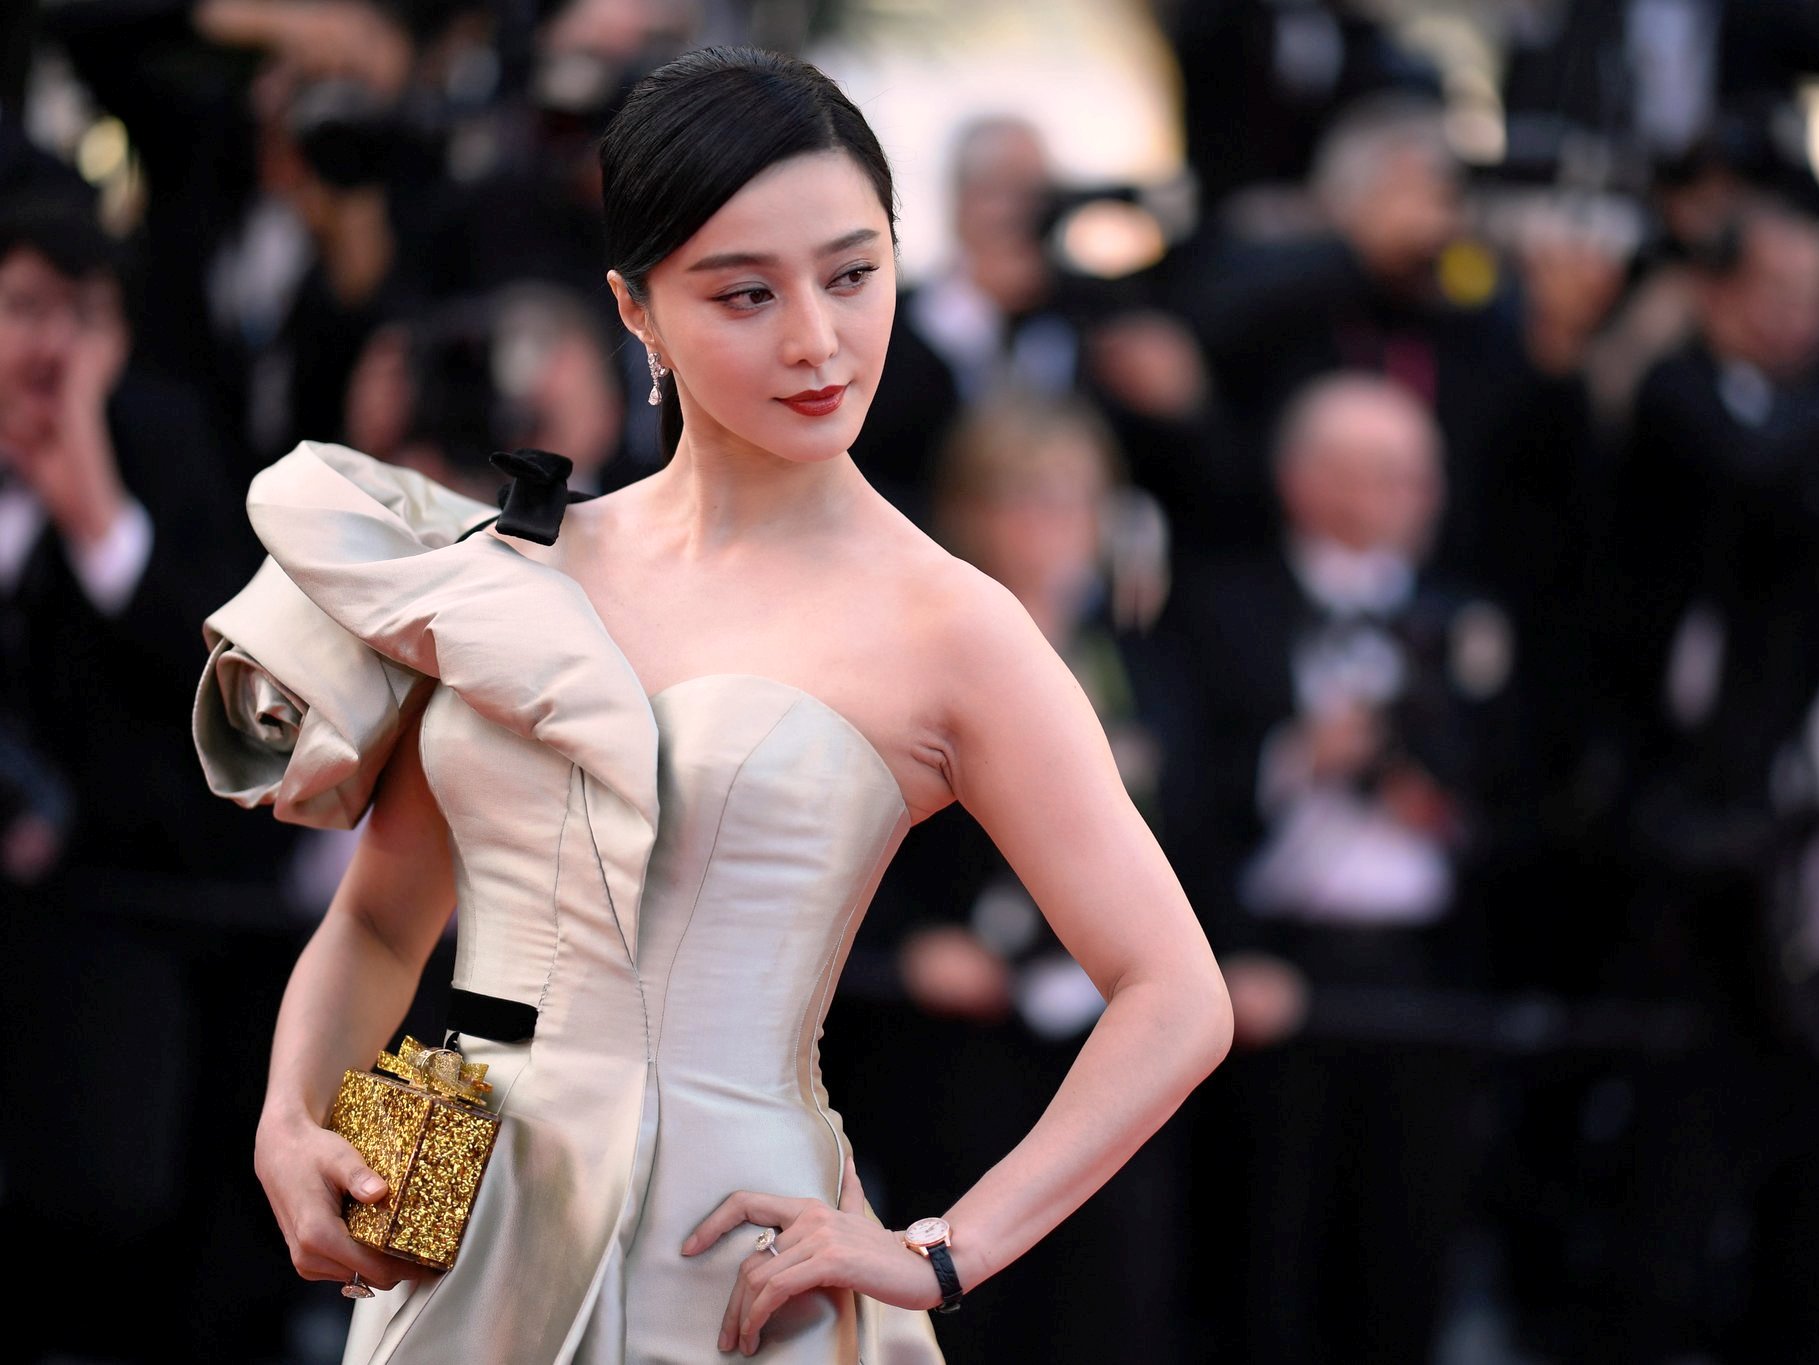 Who was Behind the Mysterious Disappearance and Reappearance of International Star Fan Bingbing?